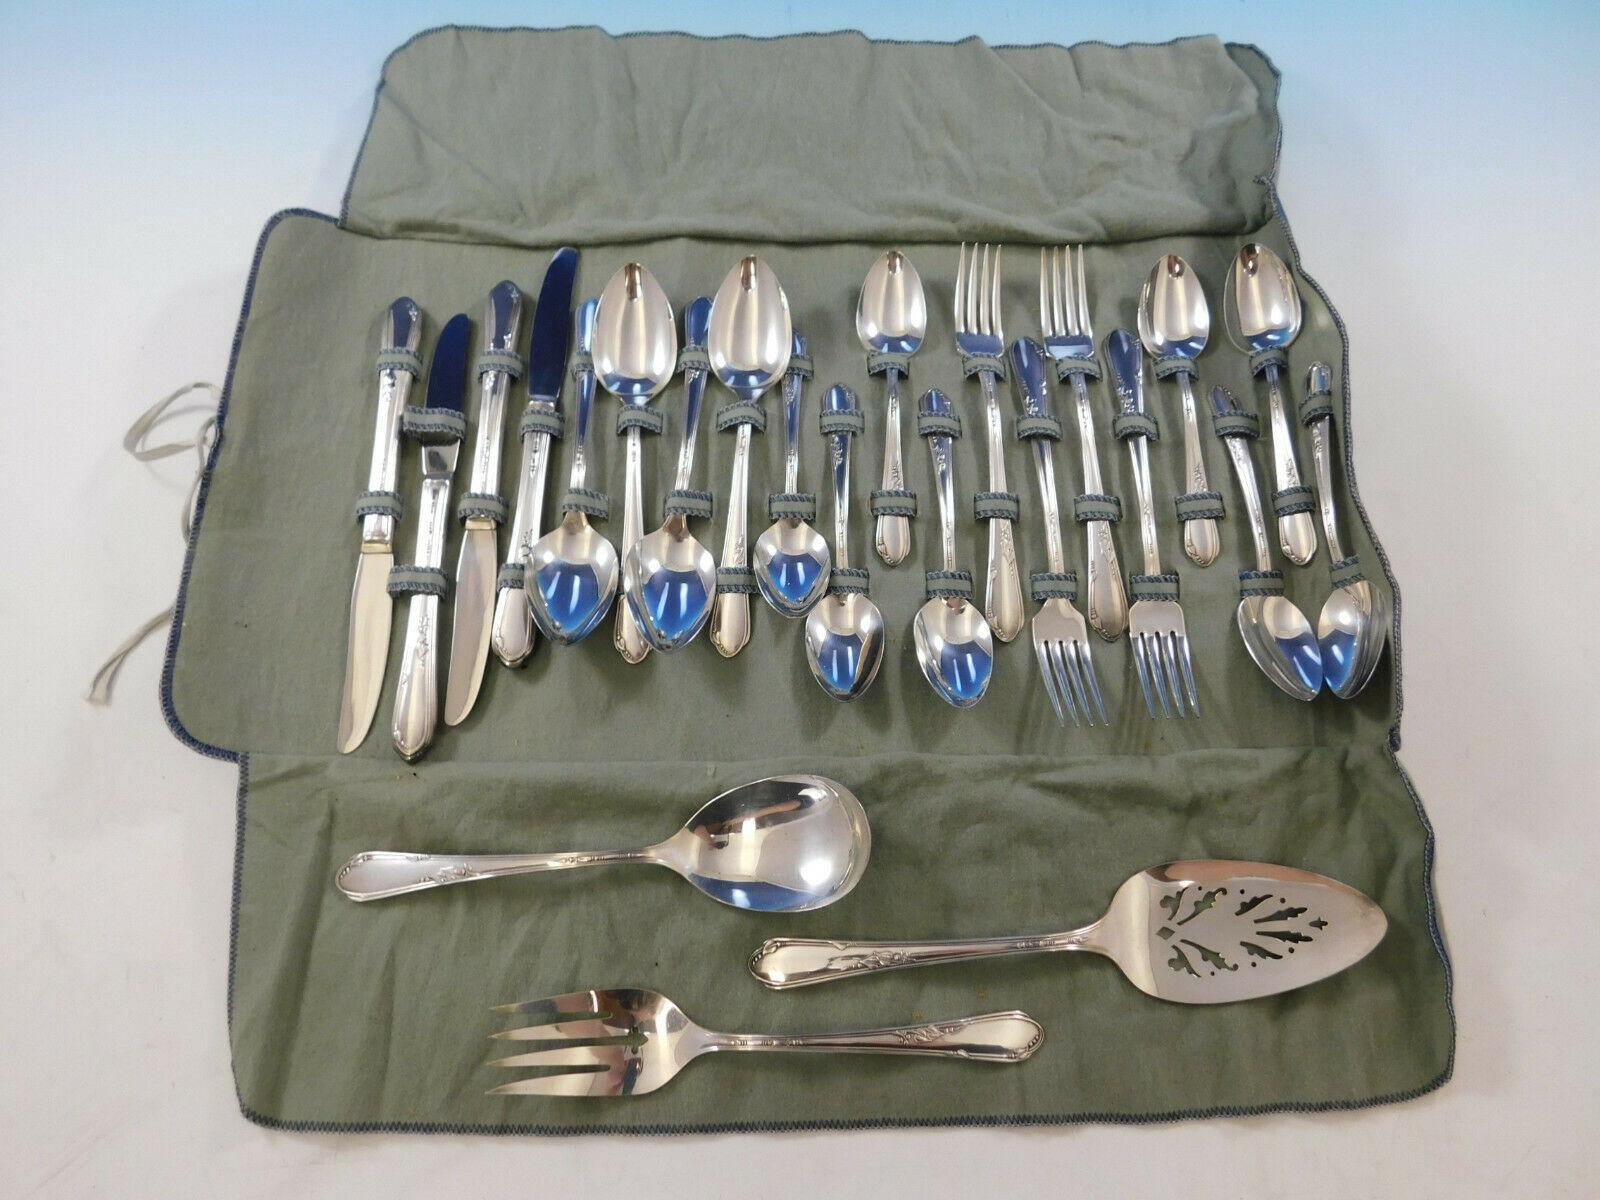 Meadowbrook AKA Heather by Wm. Rogers, circa 1936 Silver plate flatware set, 23 pieces. This set includes:

4 grille knives, 9 1/8